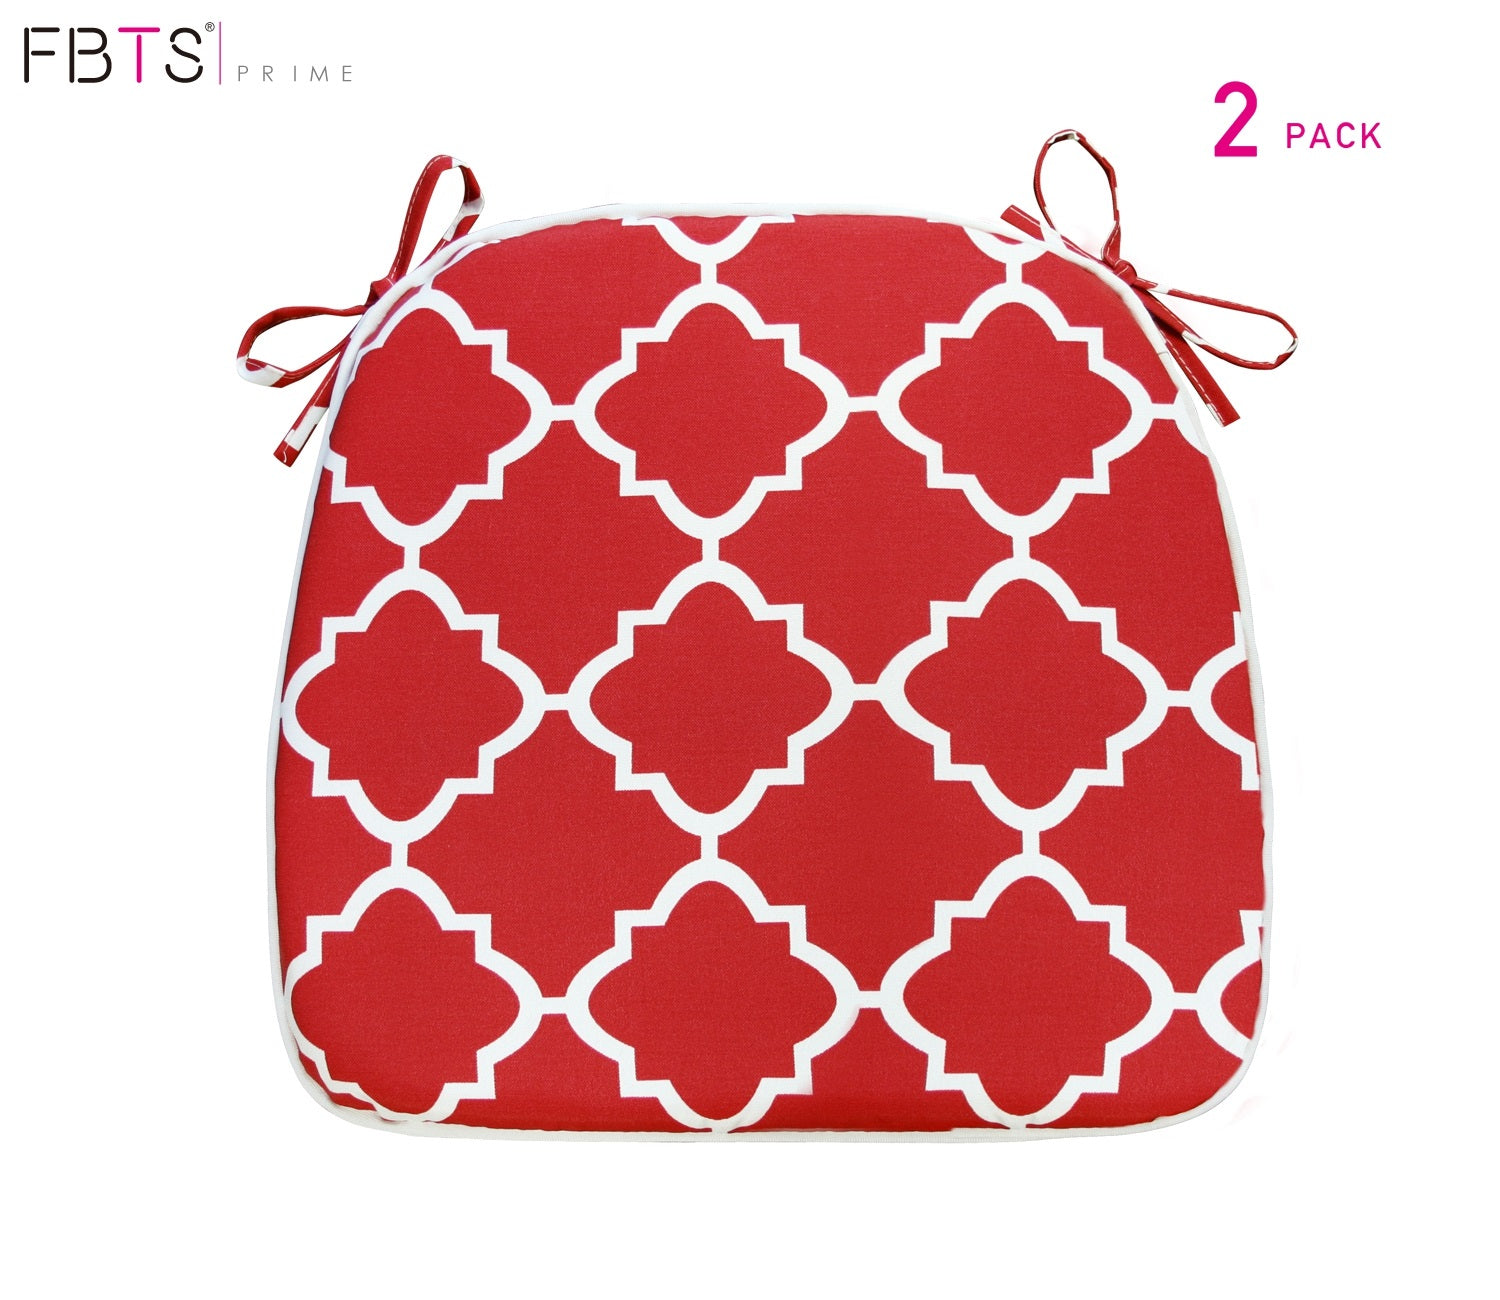 Outdoor Chair Pads Set of 2 Red Geometry Square Patio Chair Cushions with Ties